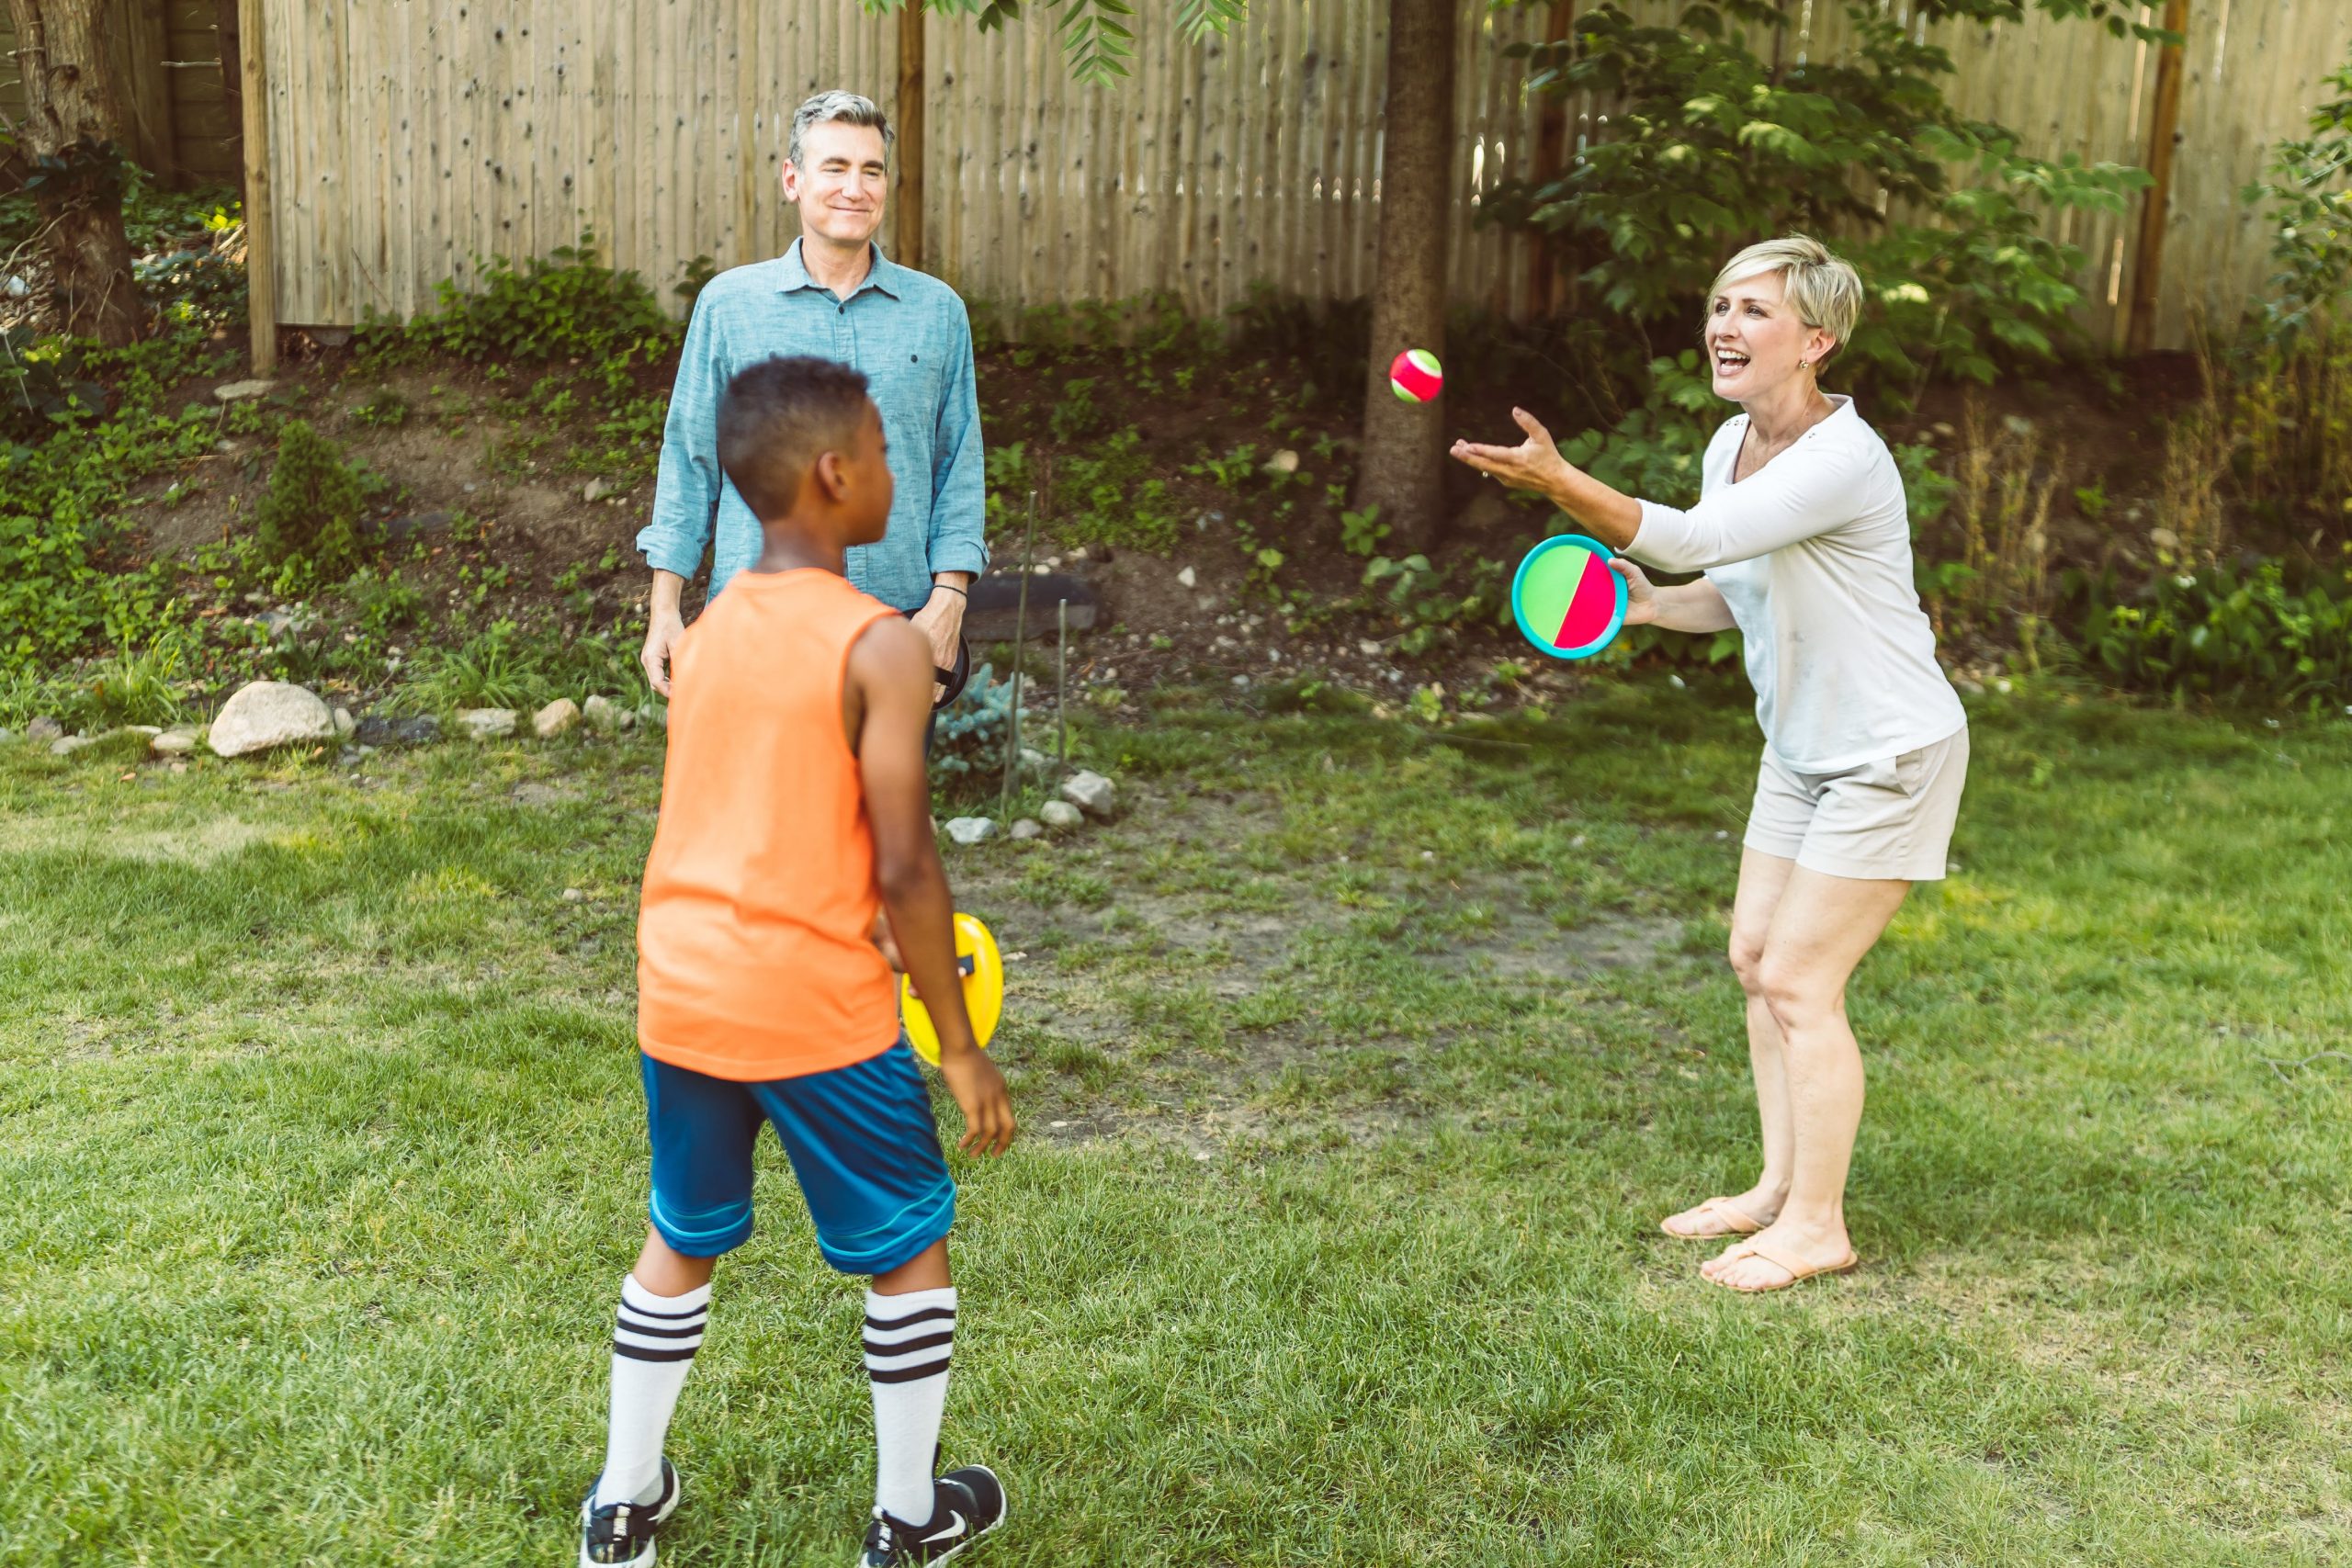 Family playing catch with a ball in a sunny backyard, with a man observing smilingly. 